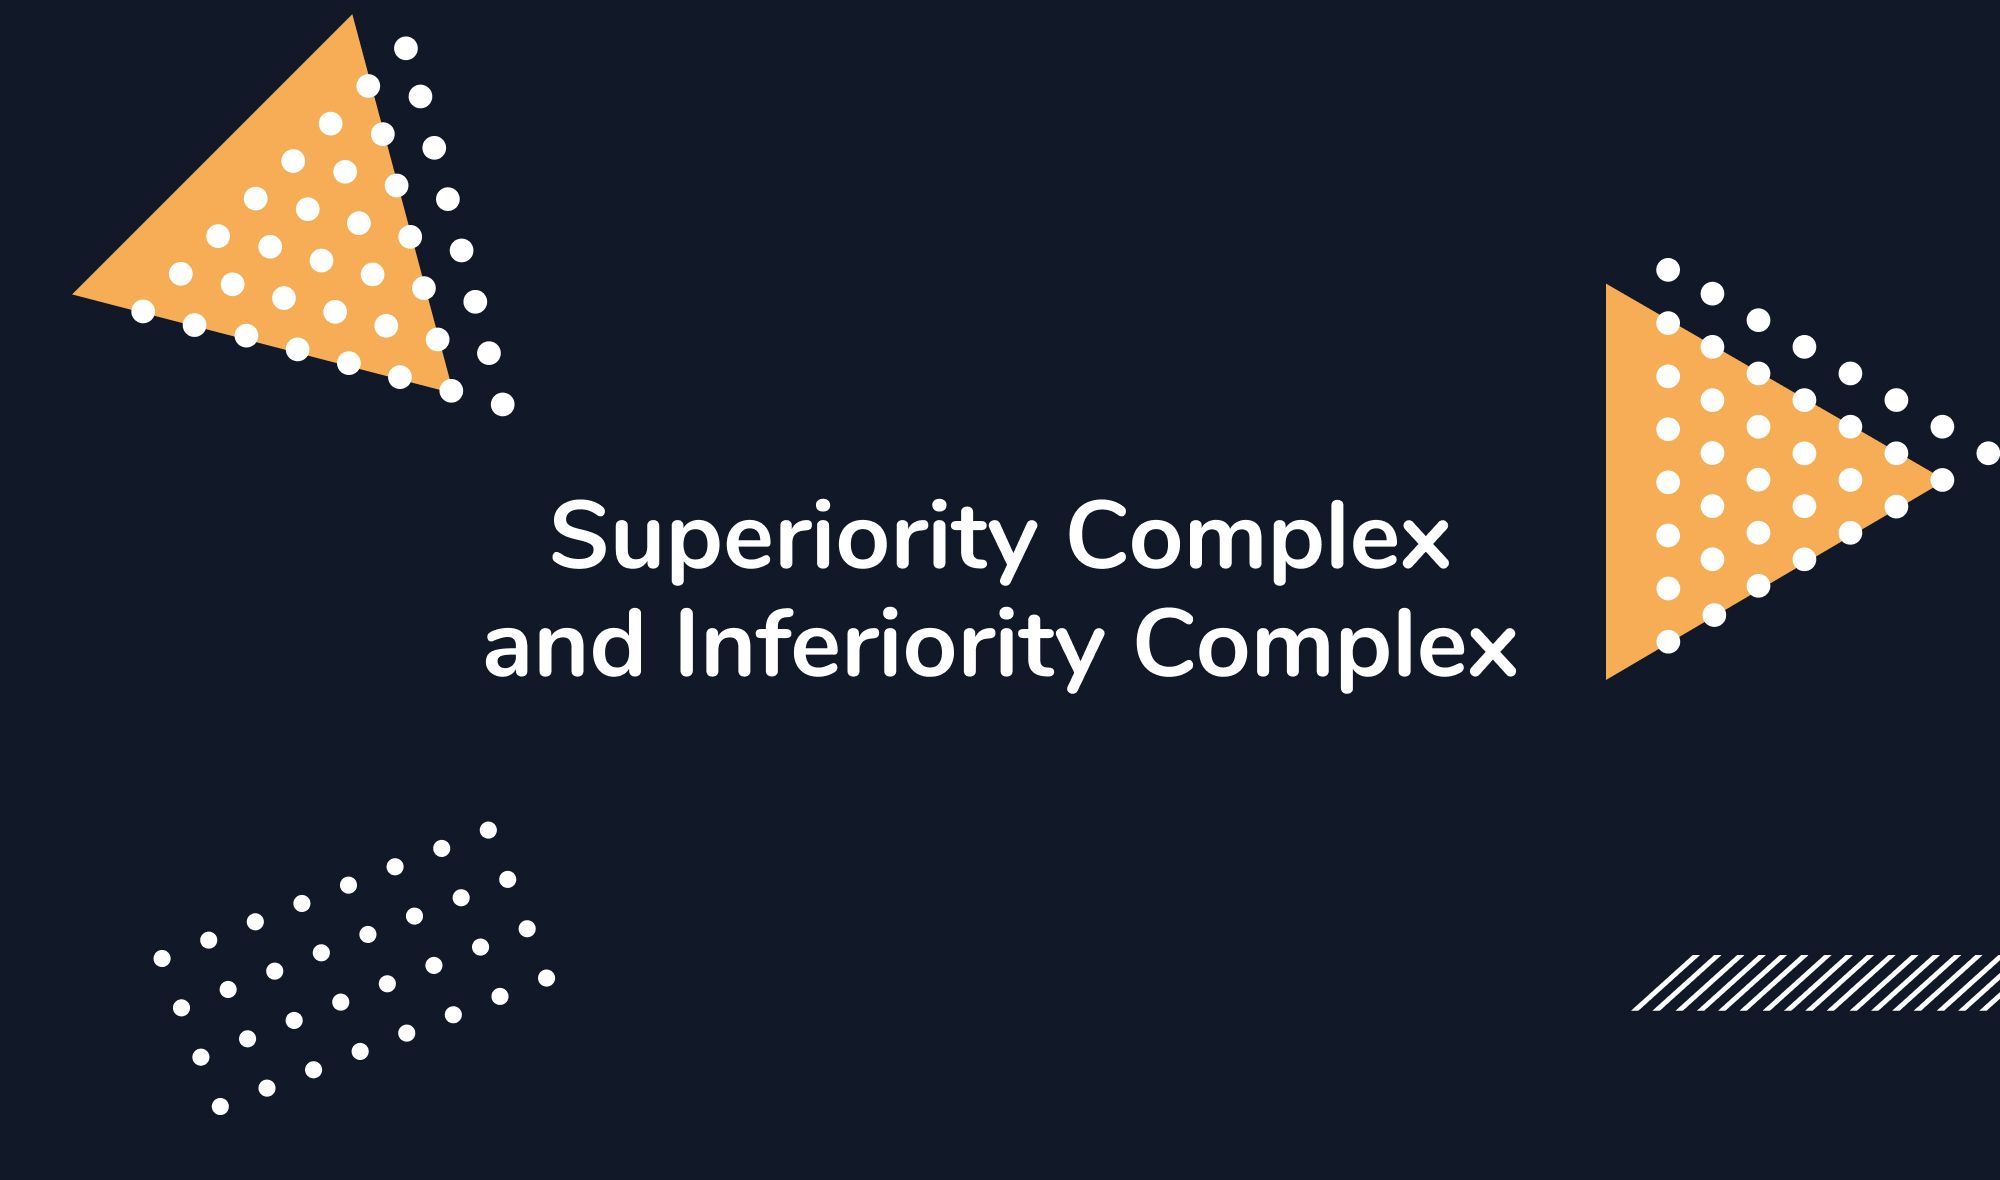 Superiority Complex and Inferiority Complex: Two Sides of the Same Coin